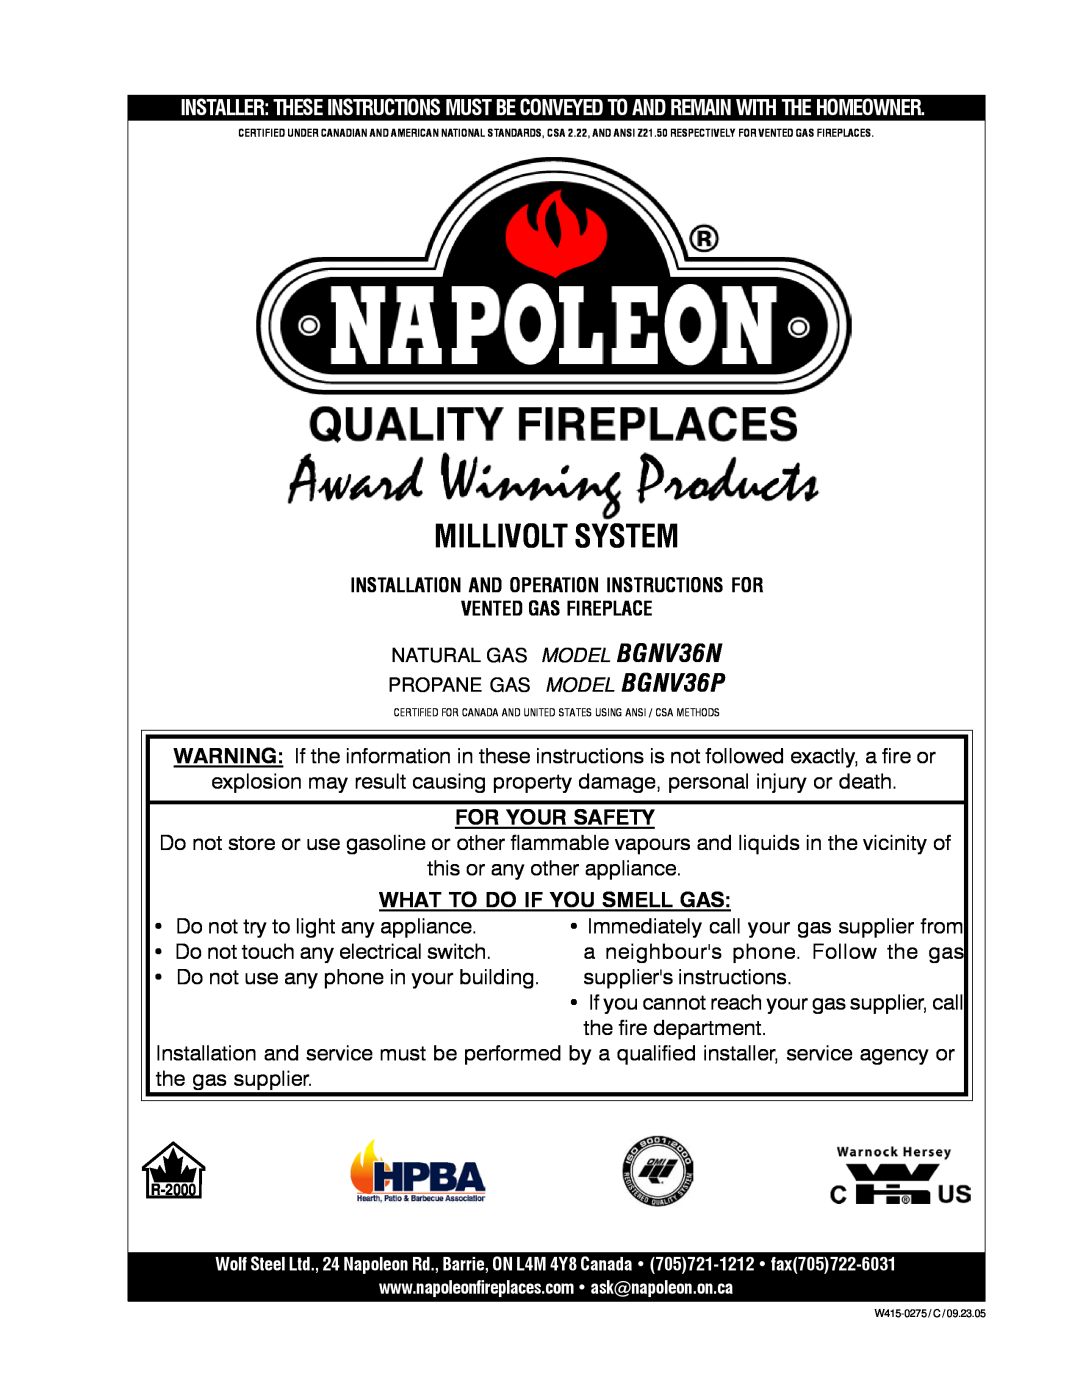 Napoleon Fireplaces BGNV36P, BGNV36N manual For Your Safety, What To Do If You Smell Gas, Millivolt System 